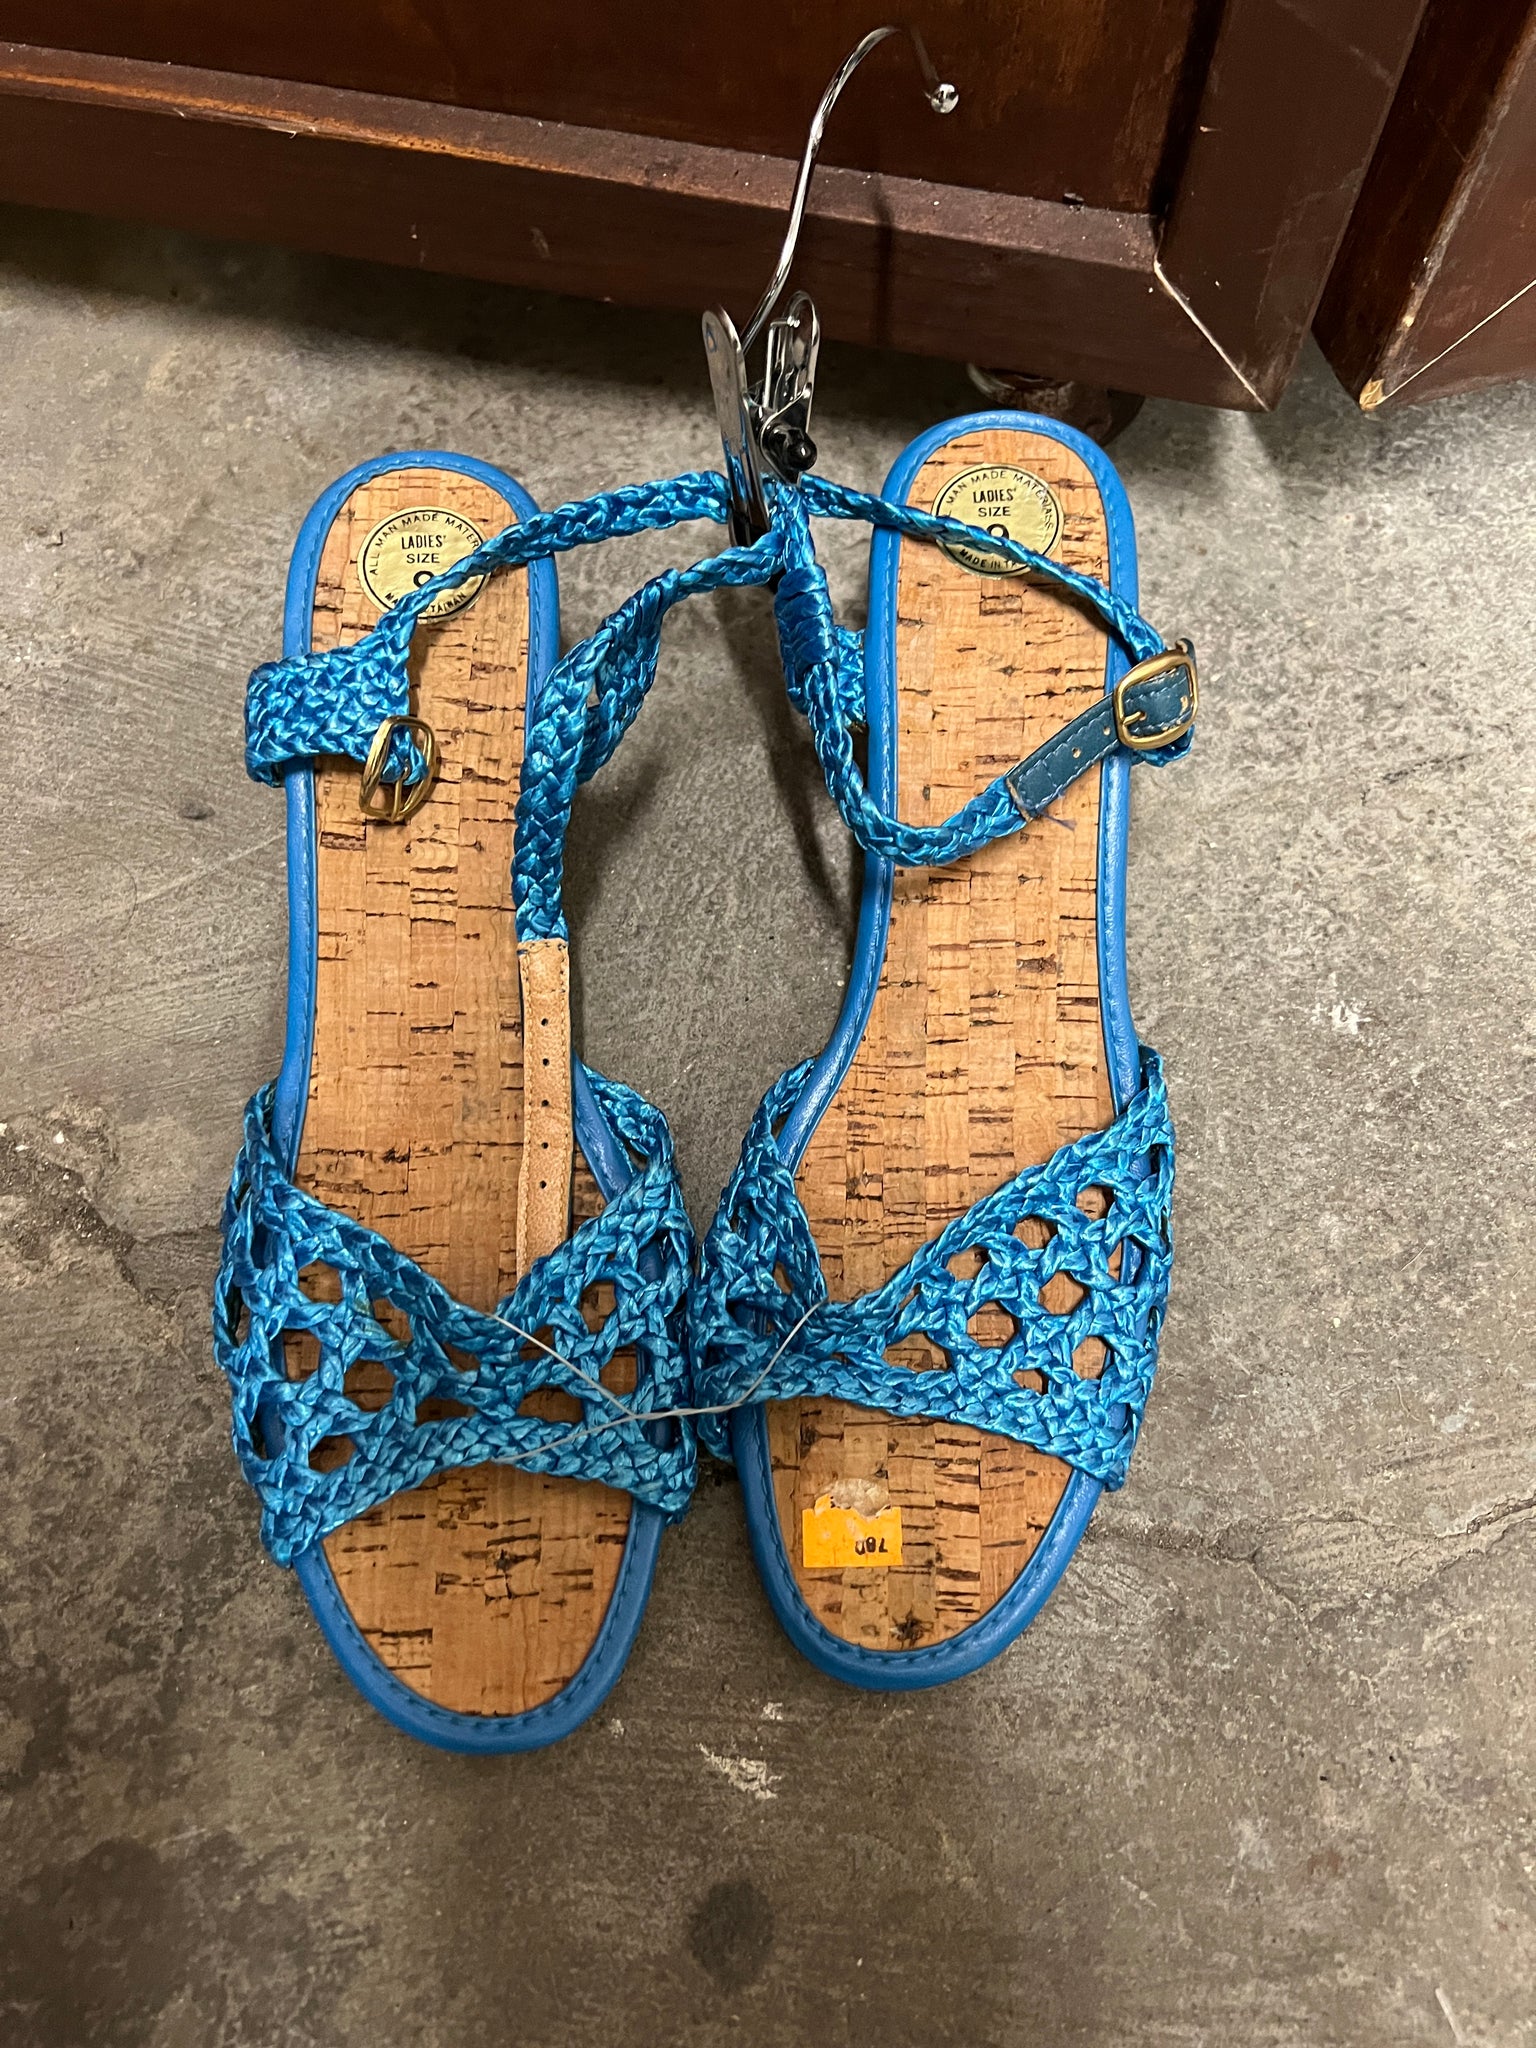 RENTAL 1980s Teal woven sandals sz 9 REPLACE $225